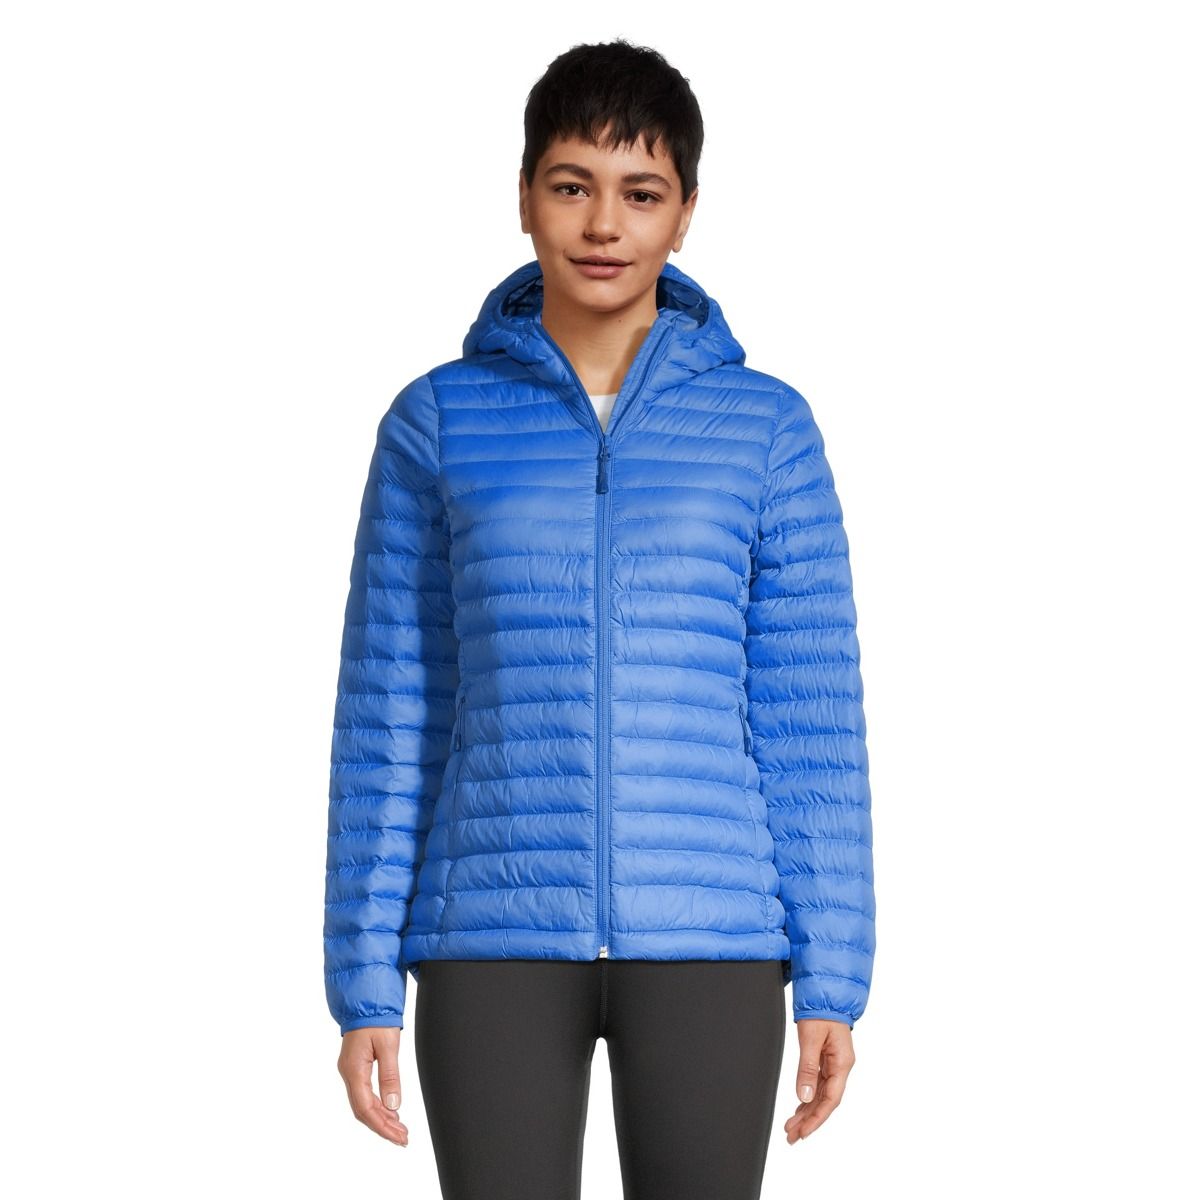 Women's insulated jacket 100GR | OUTLET | Rossignol